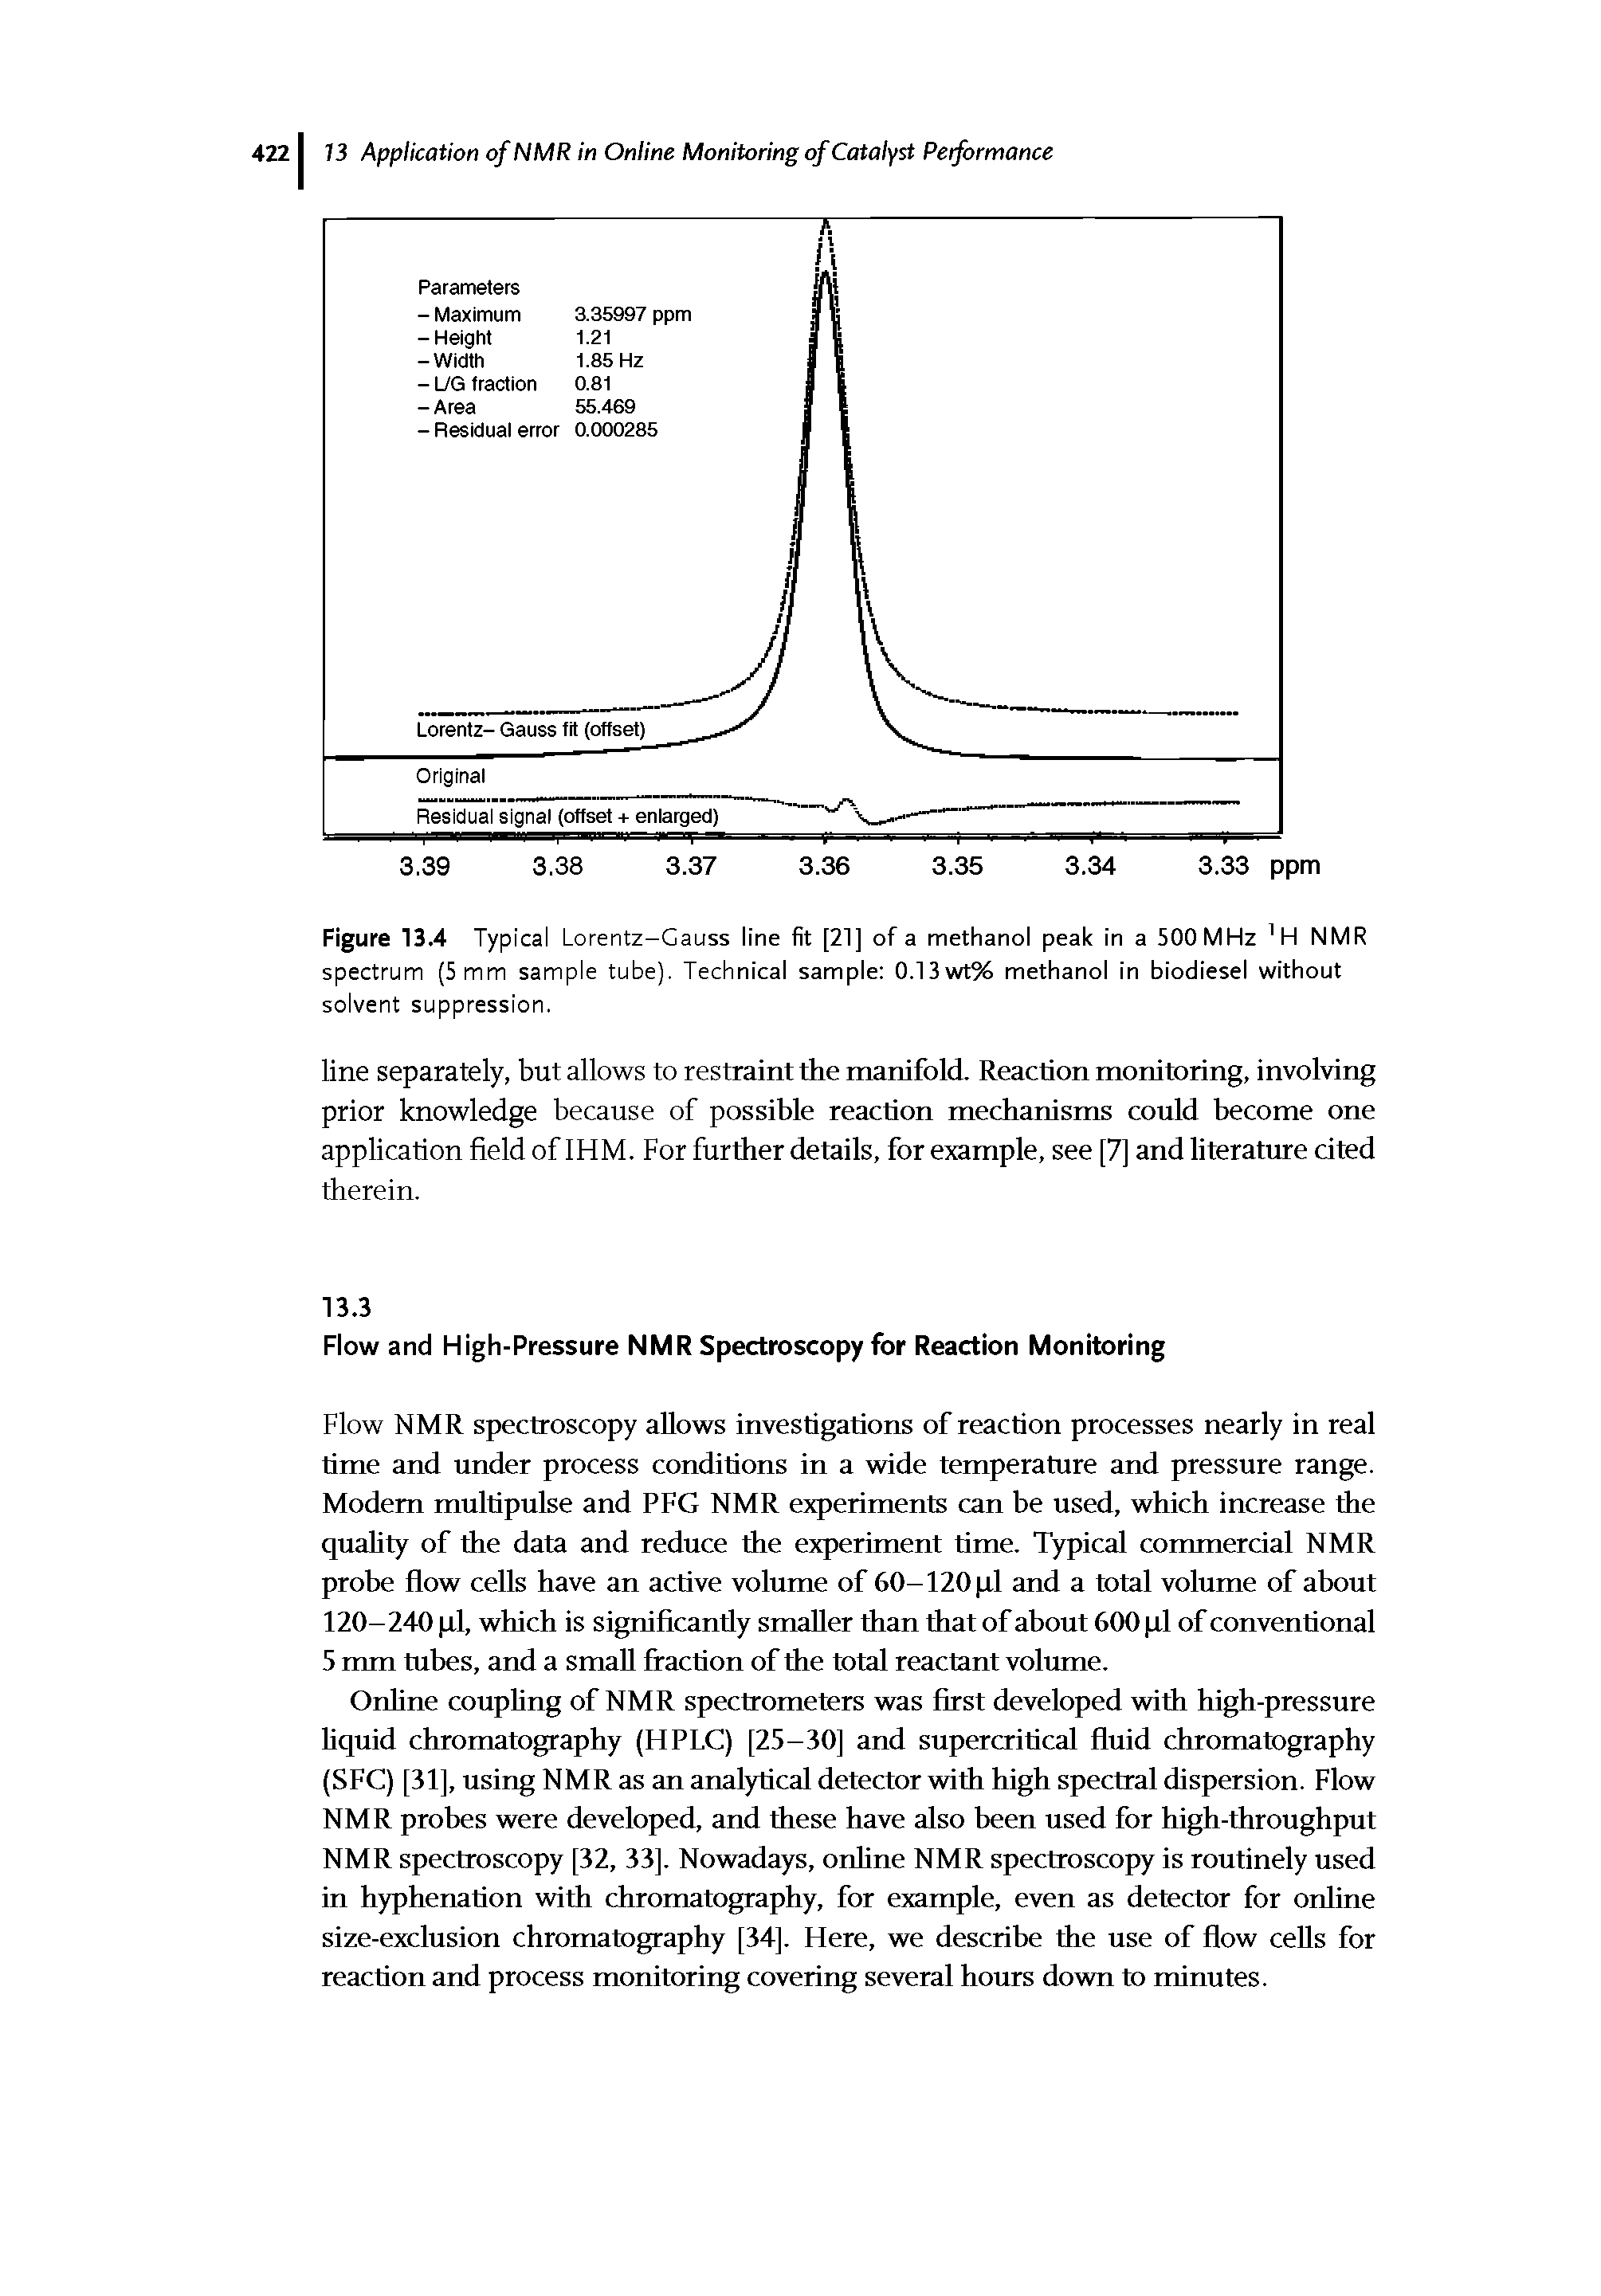 Figure 13.4 Typical Lorentz-Gauss line fit [21] of a methanol peak in a 500 MHz H NMR spectrum (5 mm sample tube). Technical sample 0.13wt% methanol in biodiesel without solvent suppression.